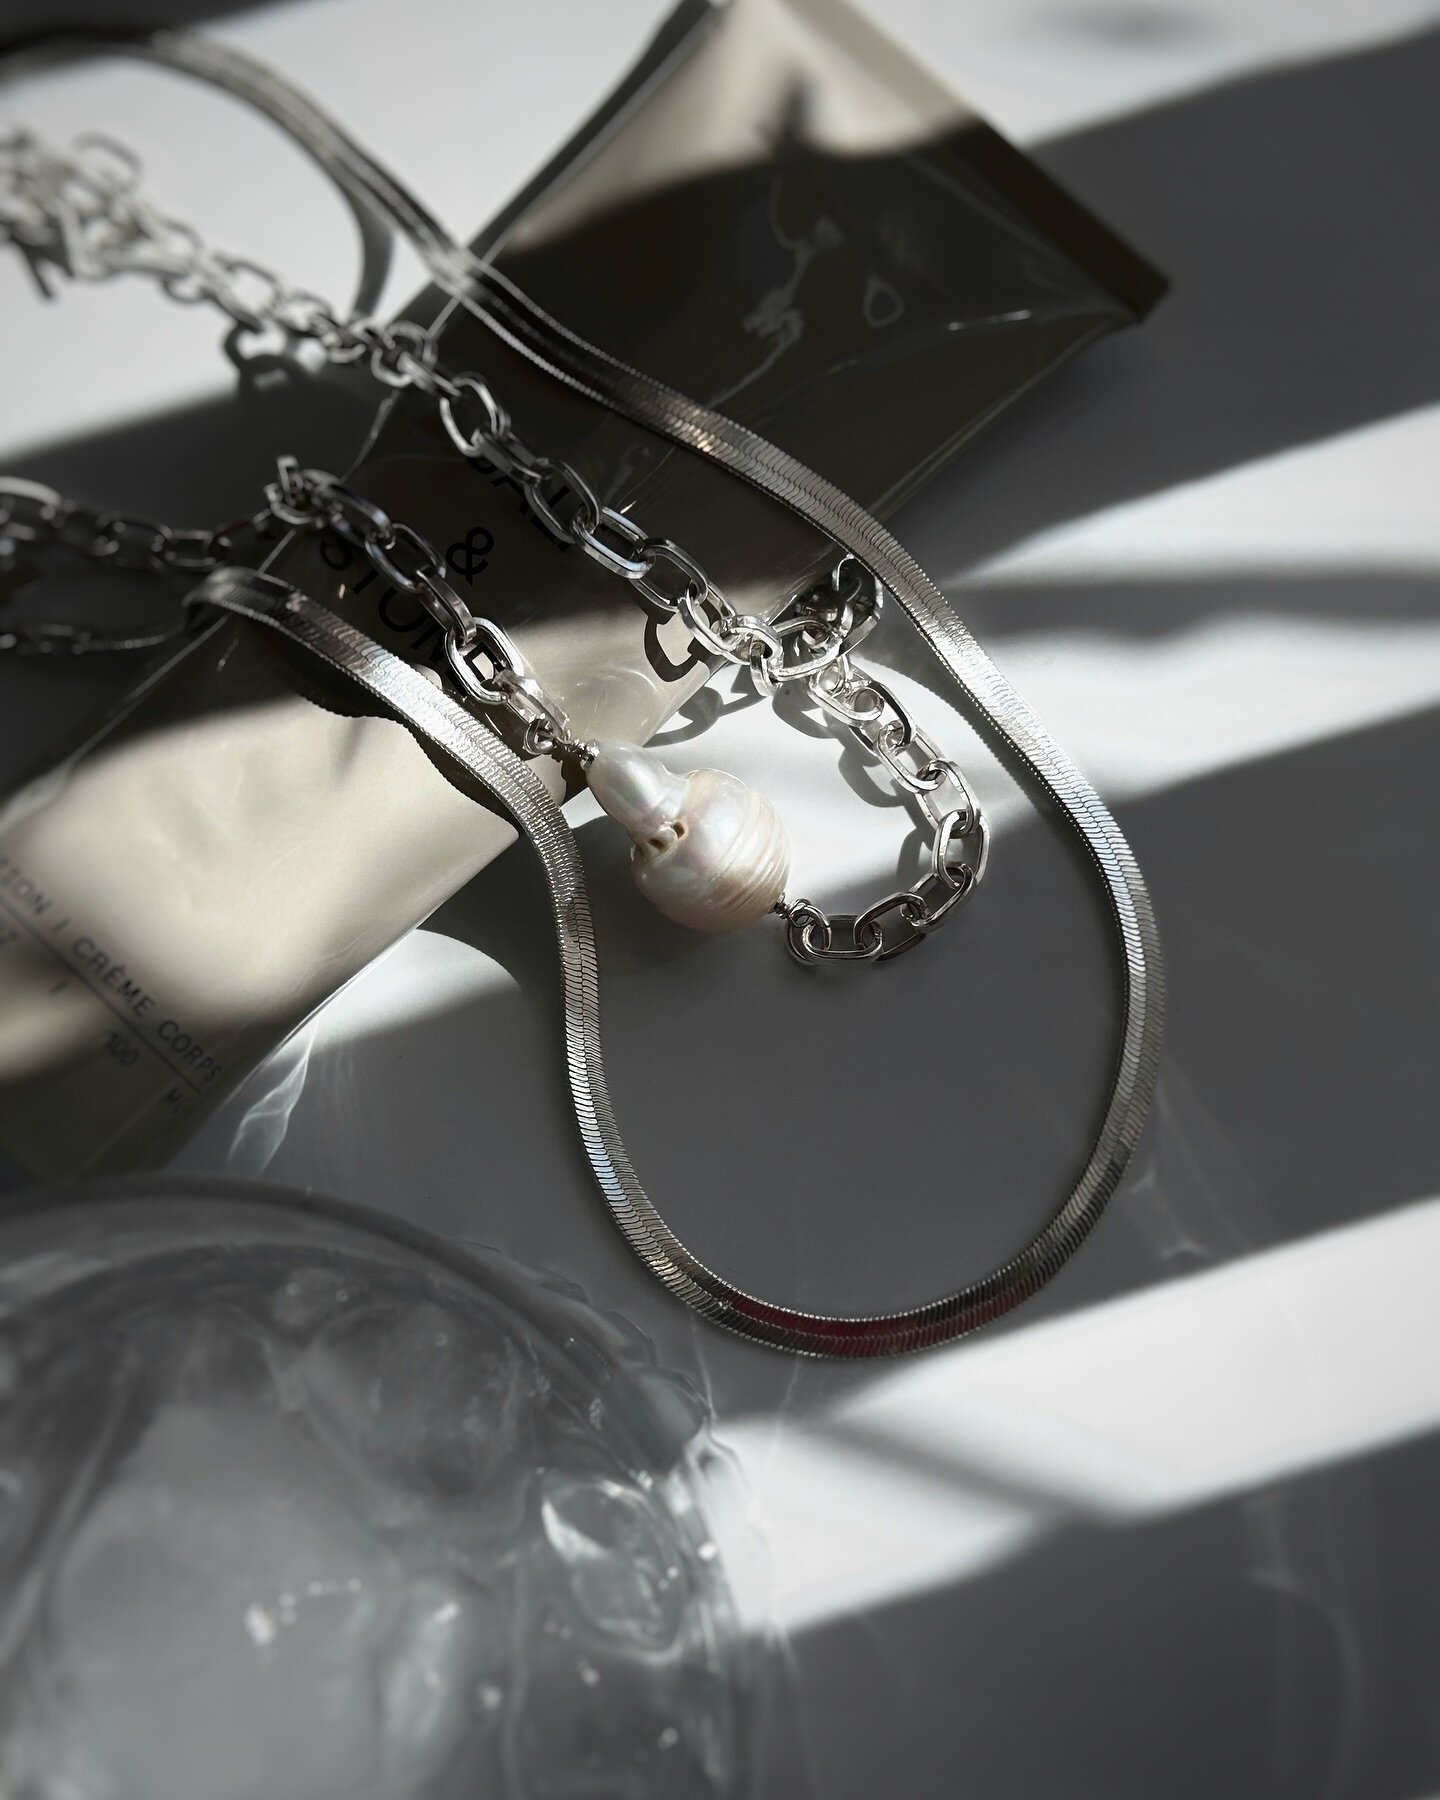 Taking care of a silver-plated chain involves a few simple steps:
Clean Regularly: Use a soft cloth to wipe away dust and oils after each wear to prevent tarnishing.
Avoid Moisture: Remove your chain before swimming, showering, or exercising to preve